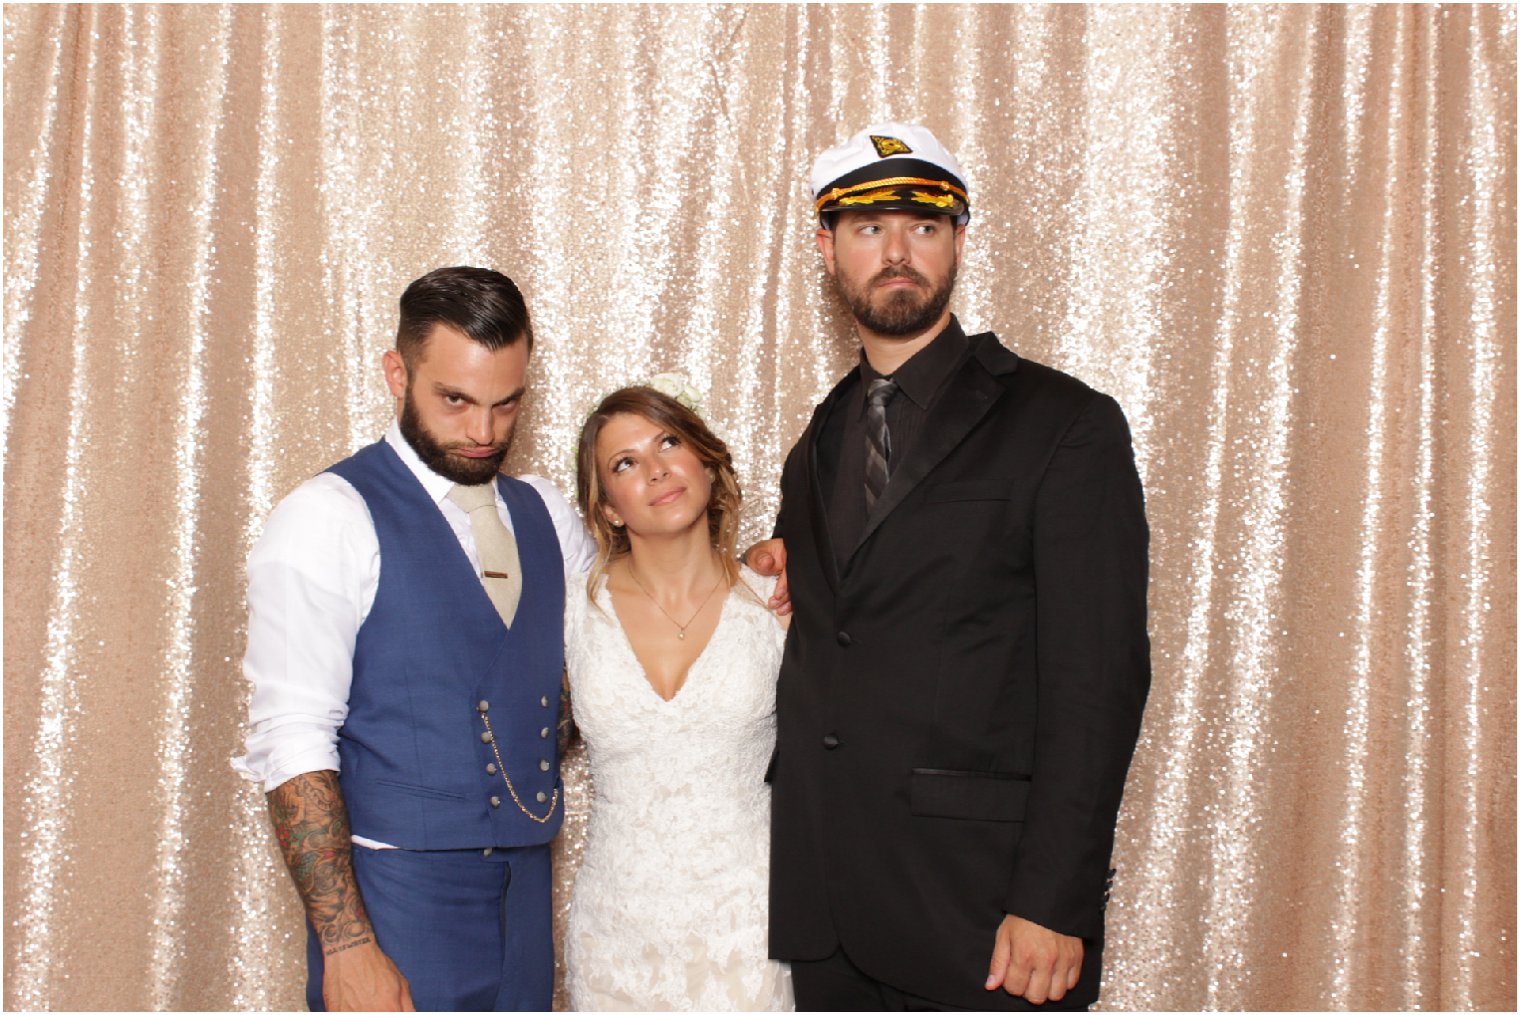 New Hope Photo Booth Rental